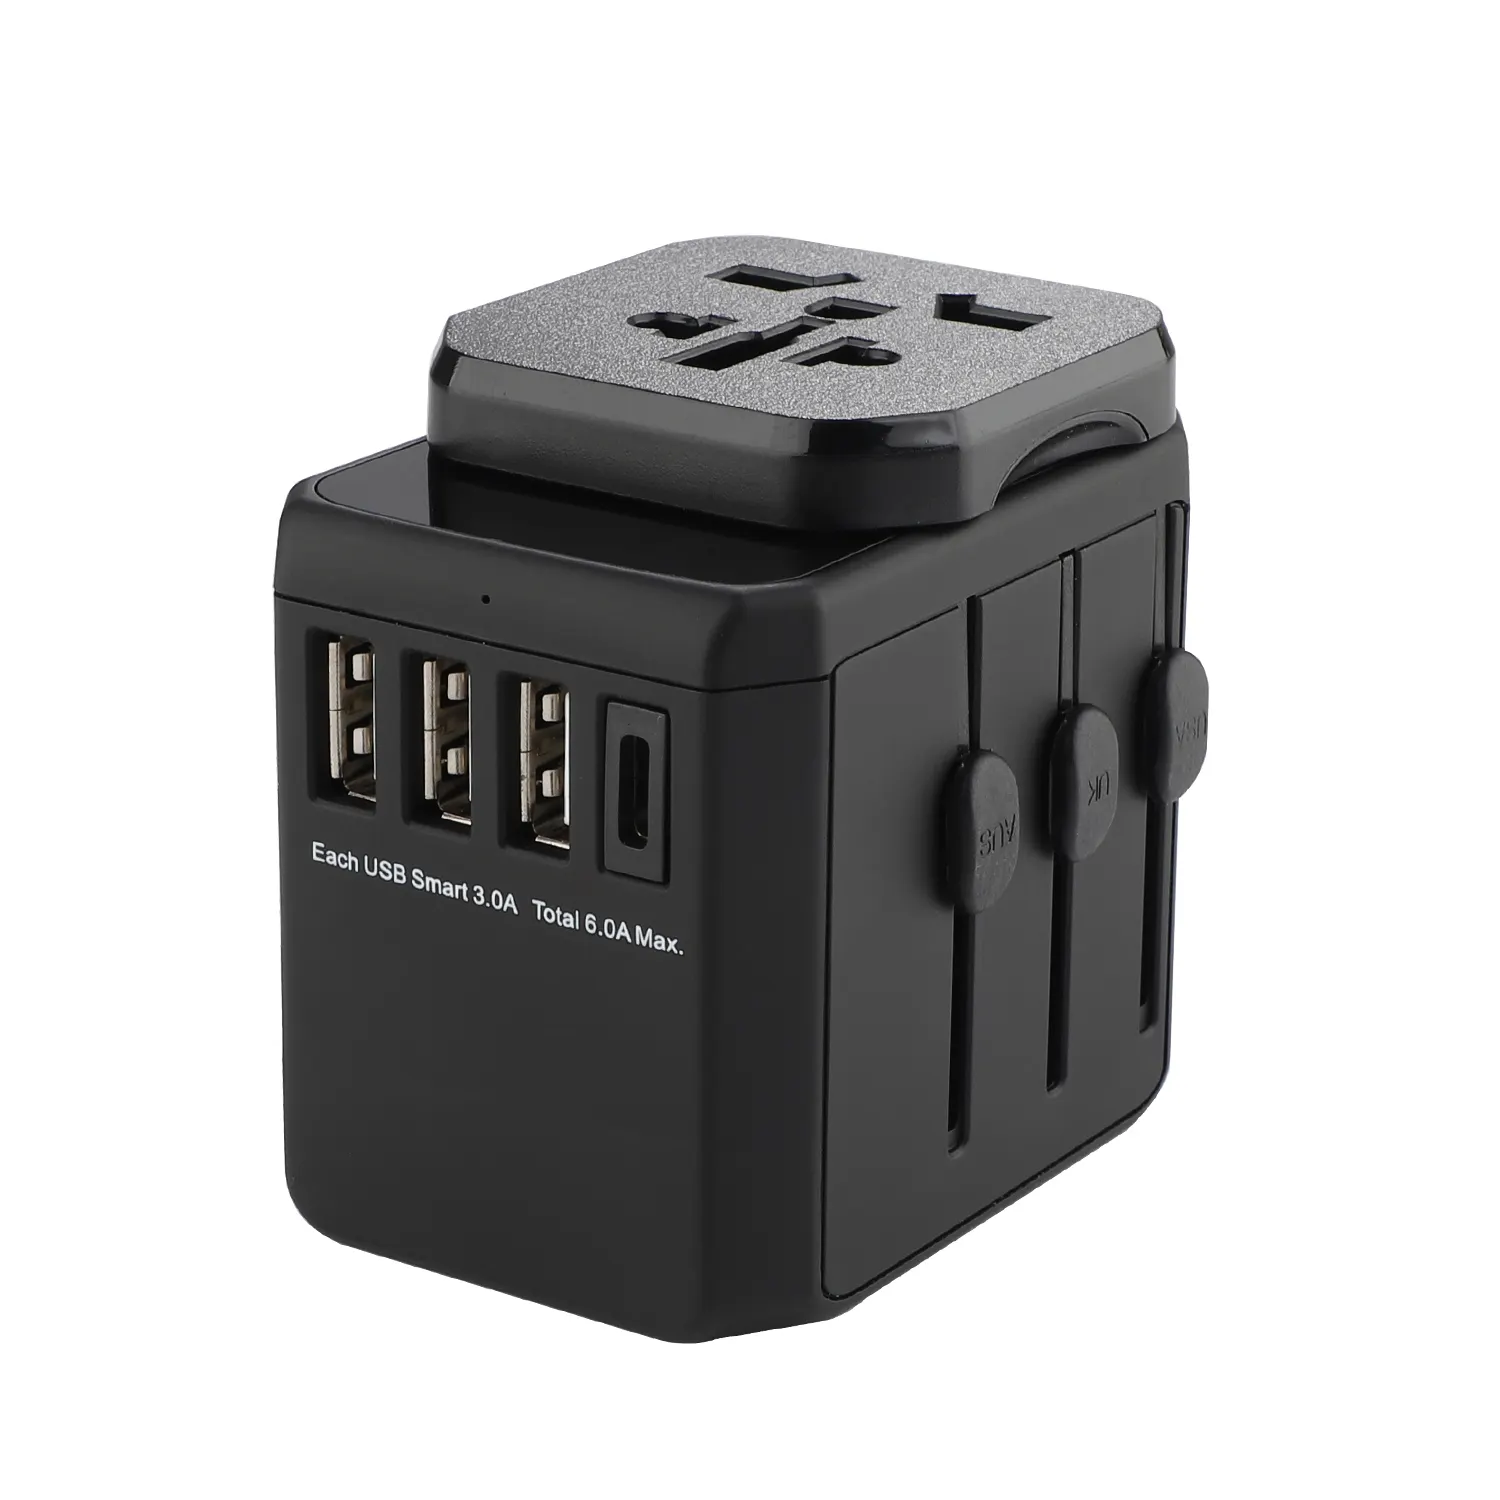 Hot Sale Grounded Pin 10A 4 USB Port Travel Plug Adapter Universal Earth Pin European Travel Adapter